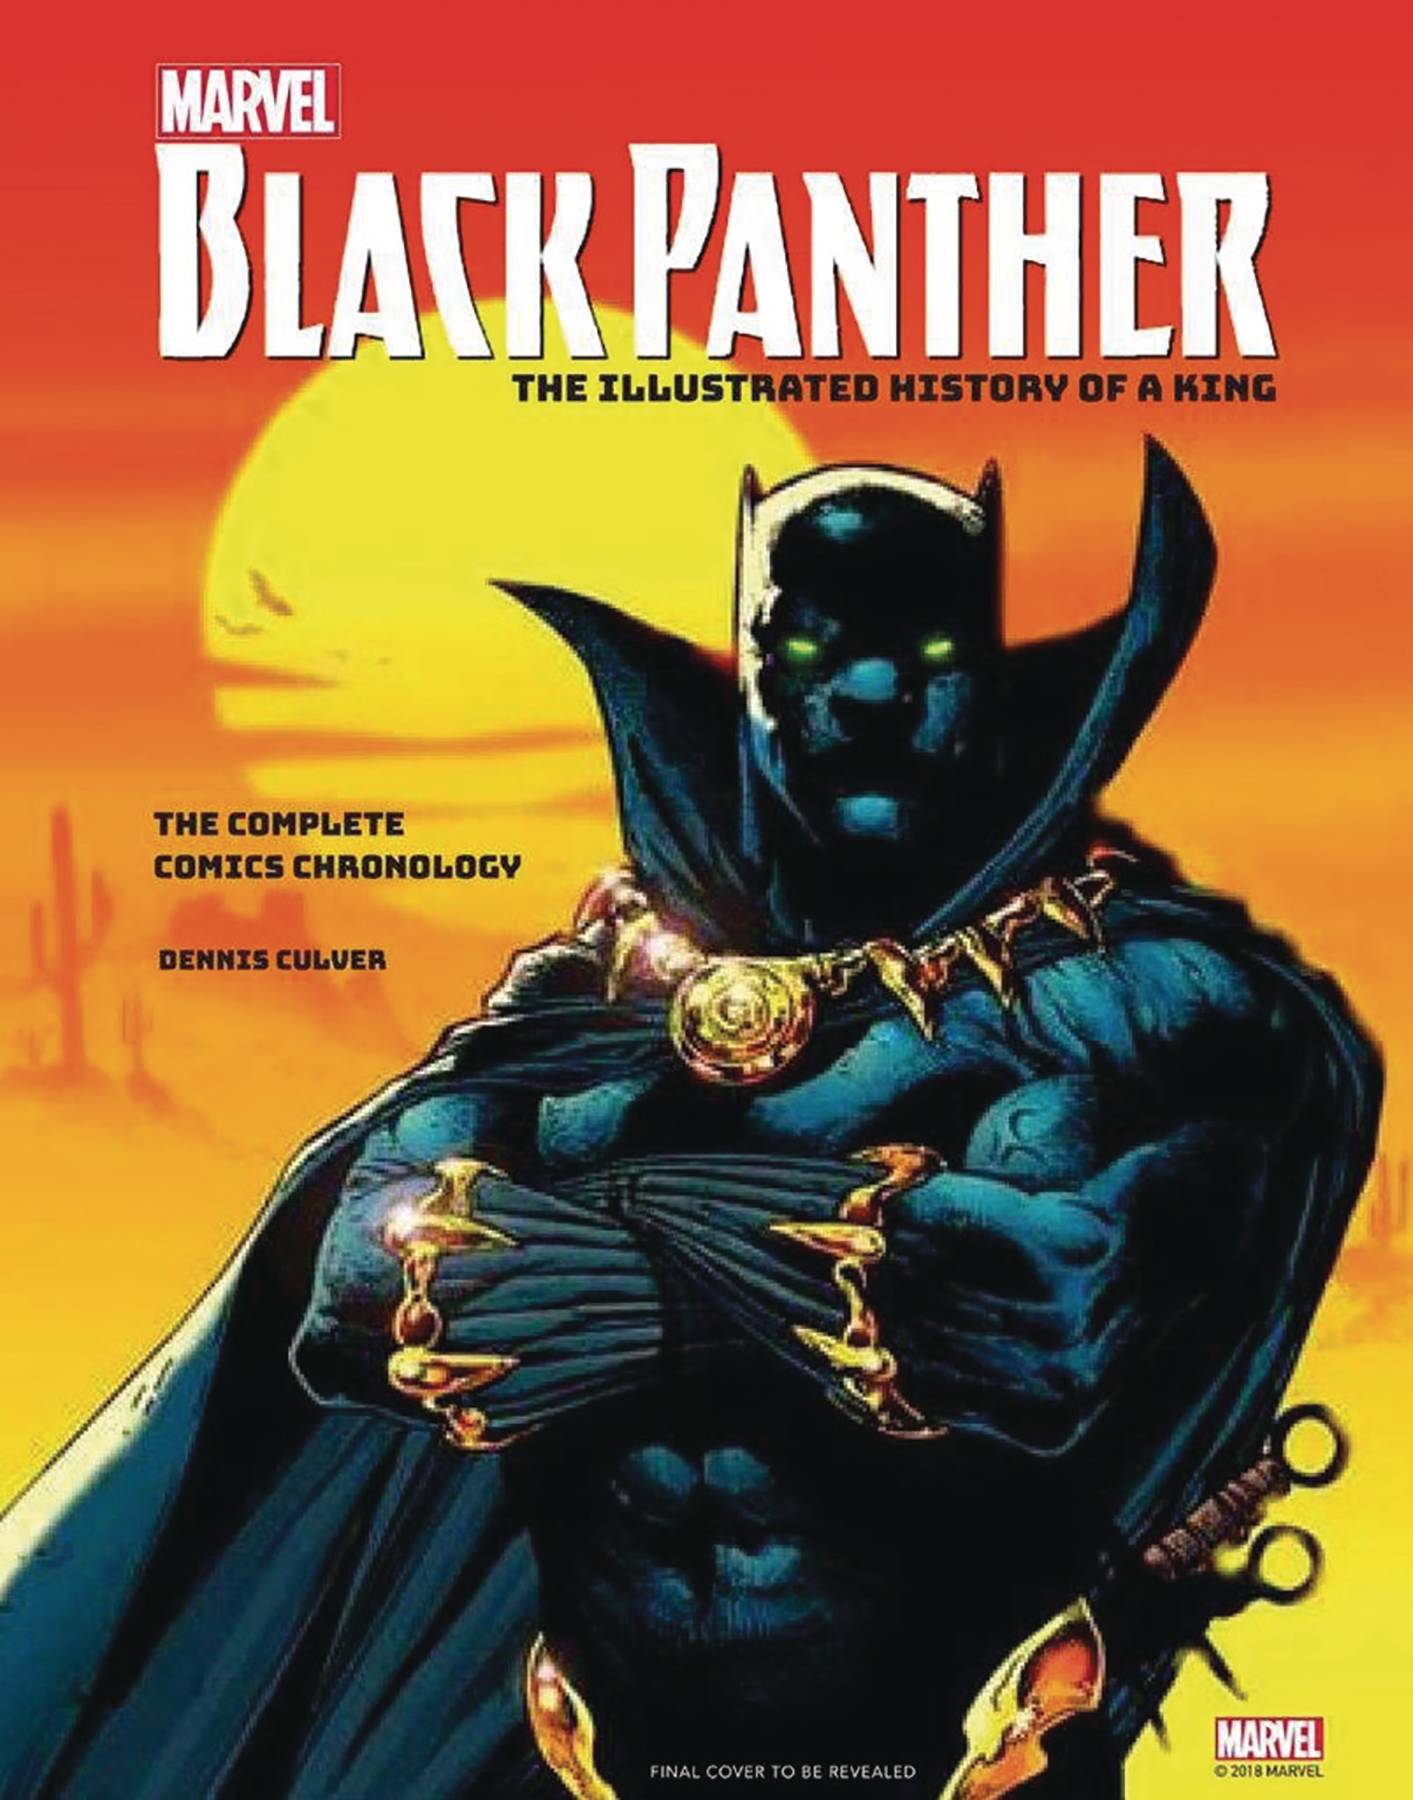 Marvels Black Panther Illustrated Hist of A King Hardcover